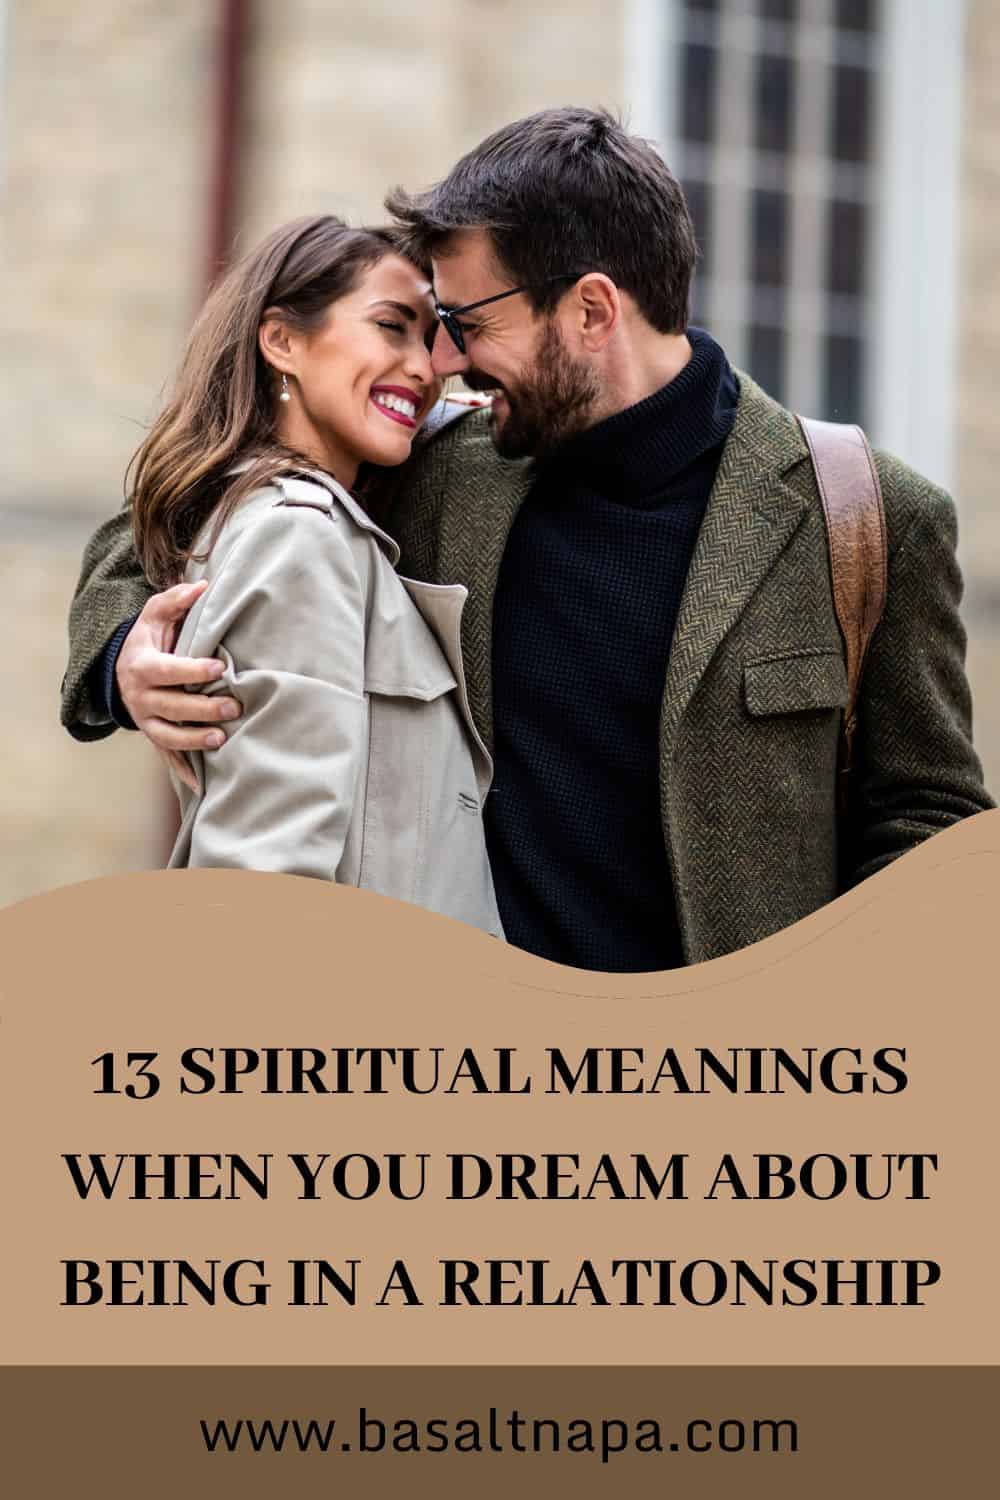 What does it mean when you dream about being in a relationship